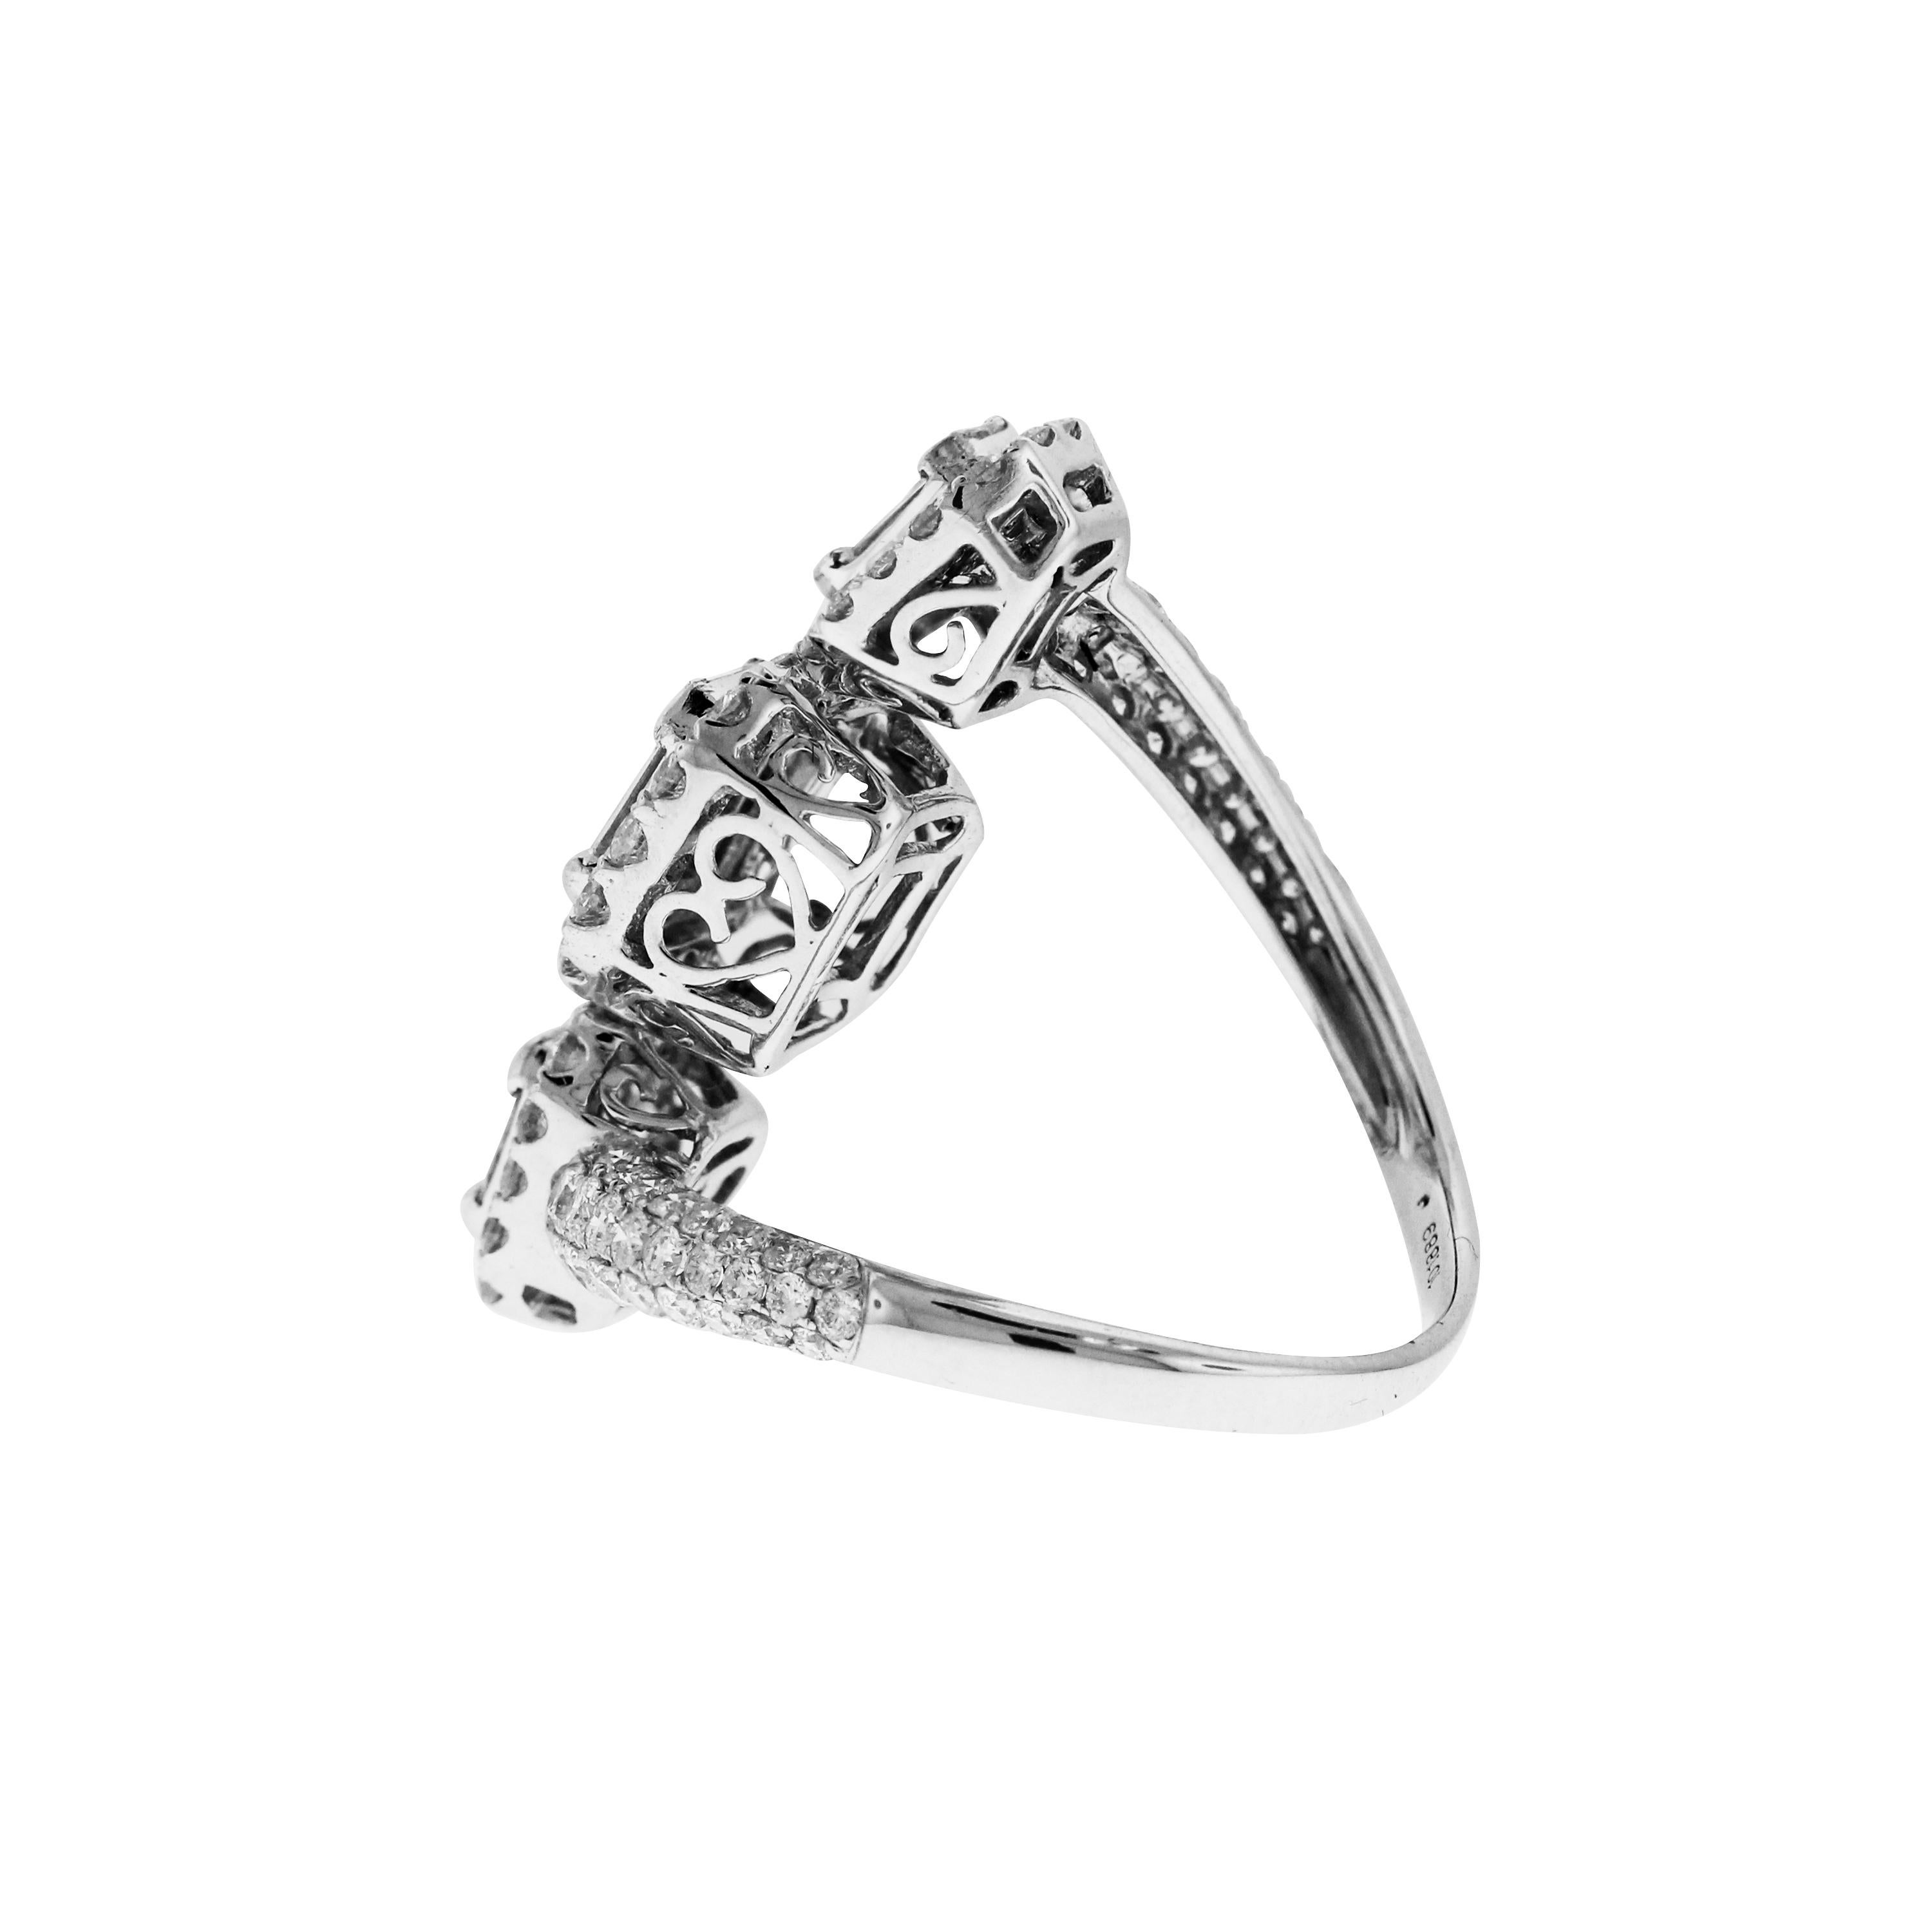 18K White Gold and Baguette Diamond Bypass Ring

Apprx. 3.50 carat G color, VS clarity diamonds. Baguette and Round cuts

Ring face is 1.1 inch by 0.35 inch

Size 8.25. Sizable.